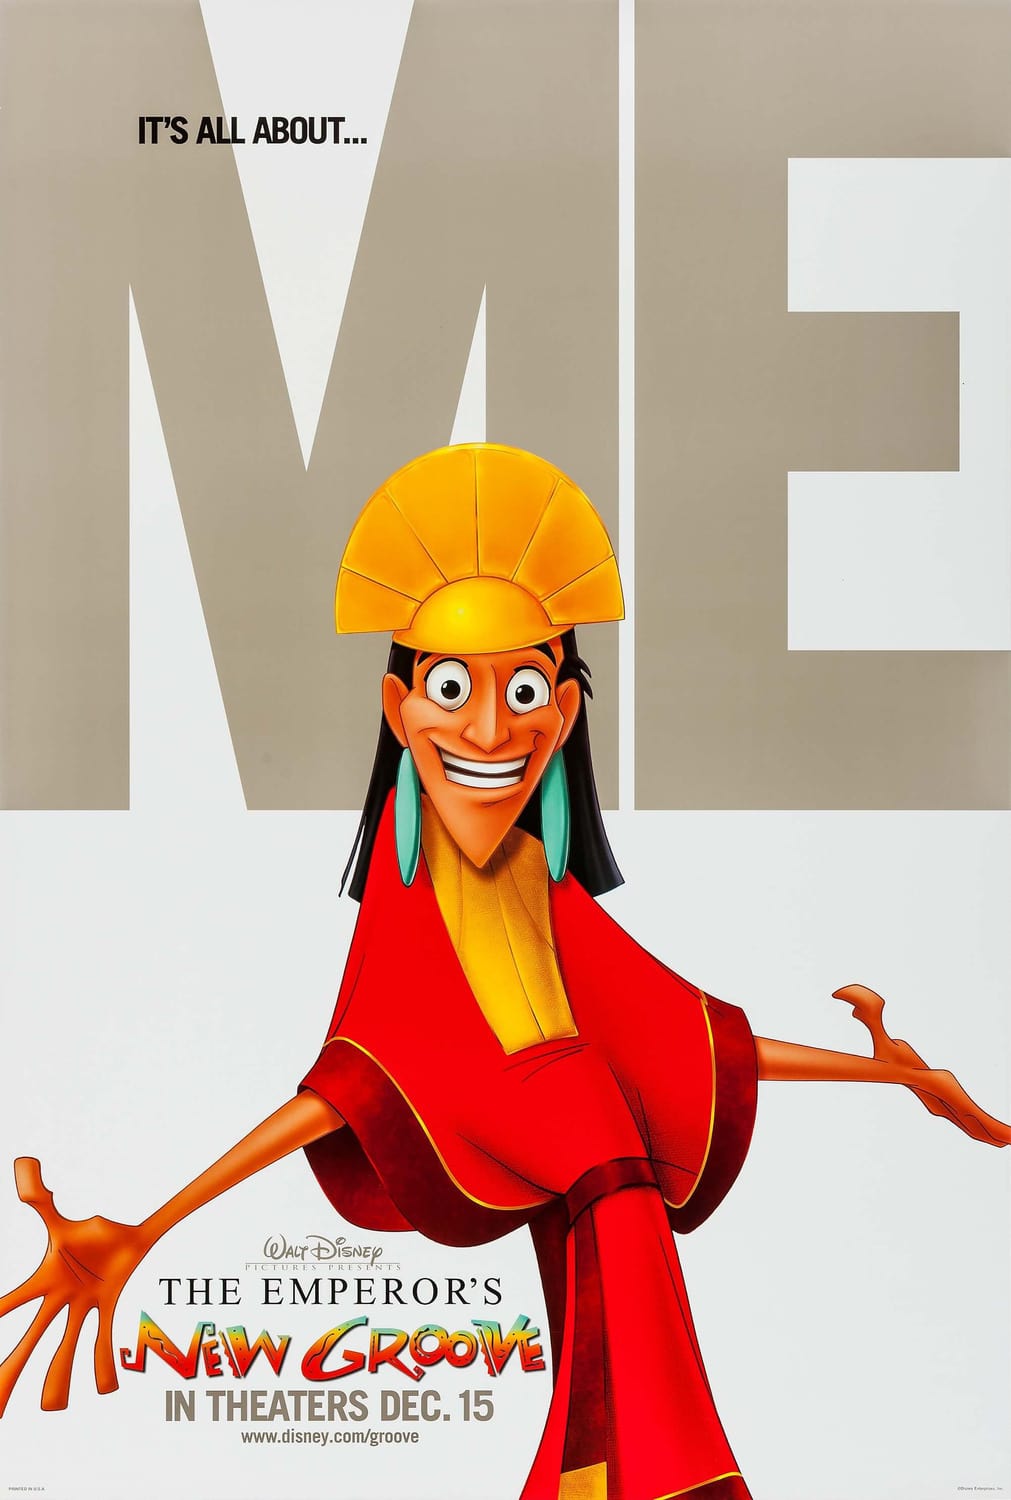 The Emperor's New Groove poster